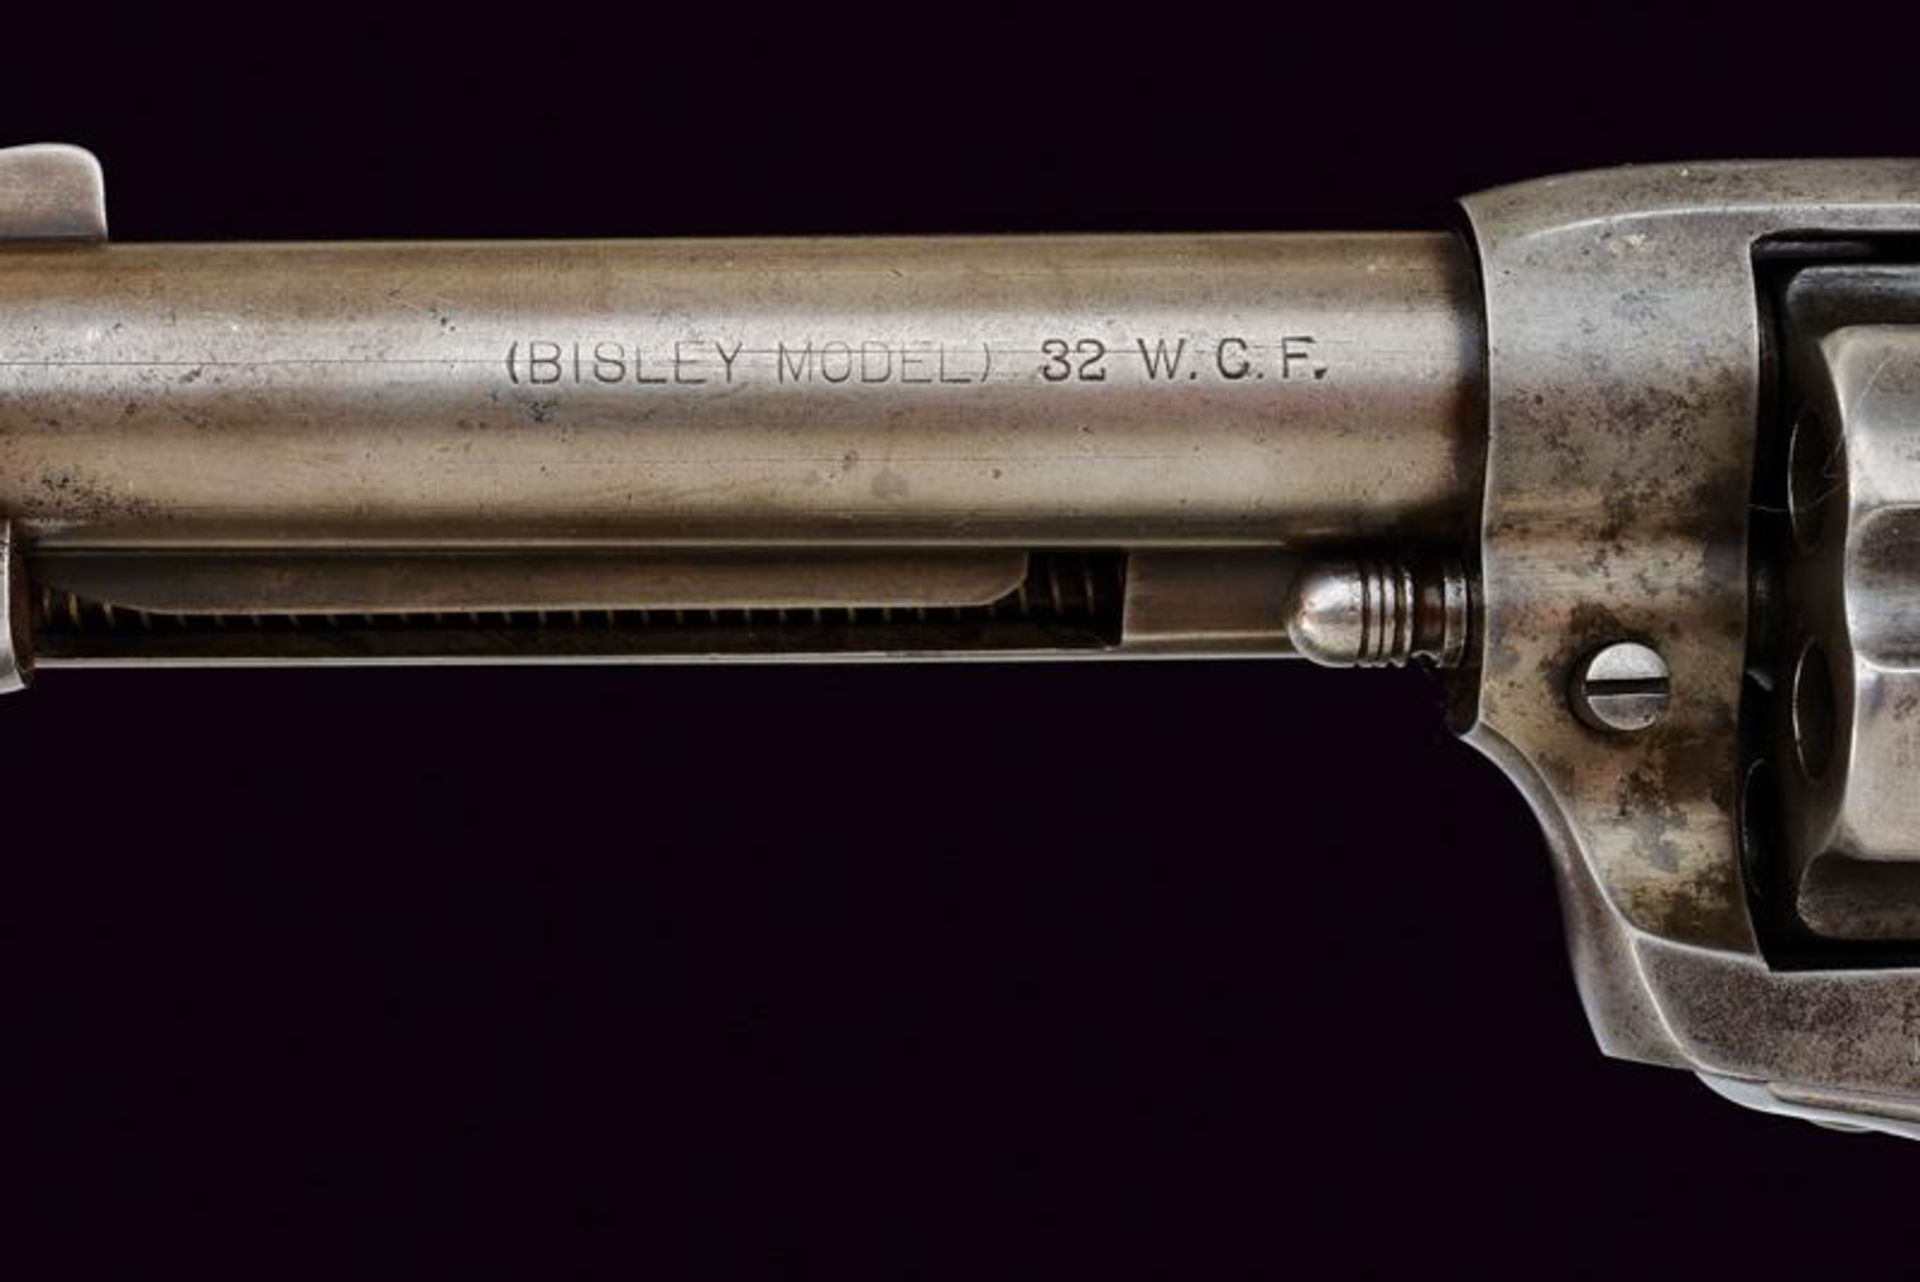 A Colt Single Action Revolver - Image 7 of 8